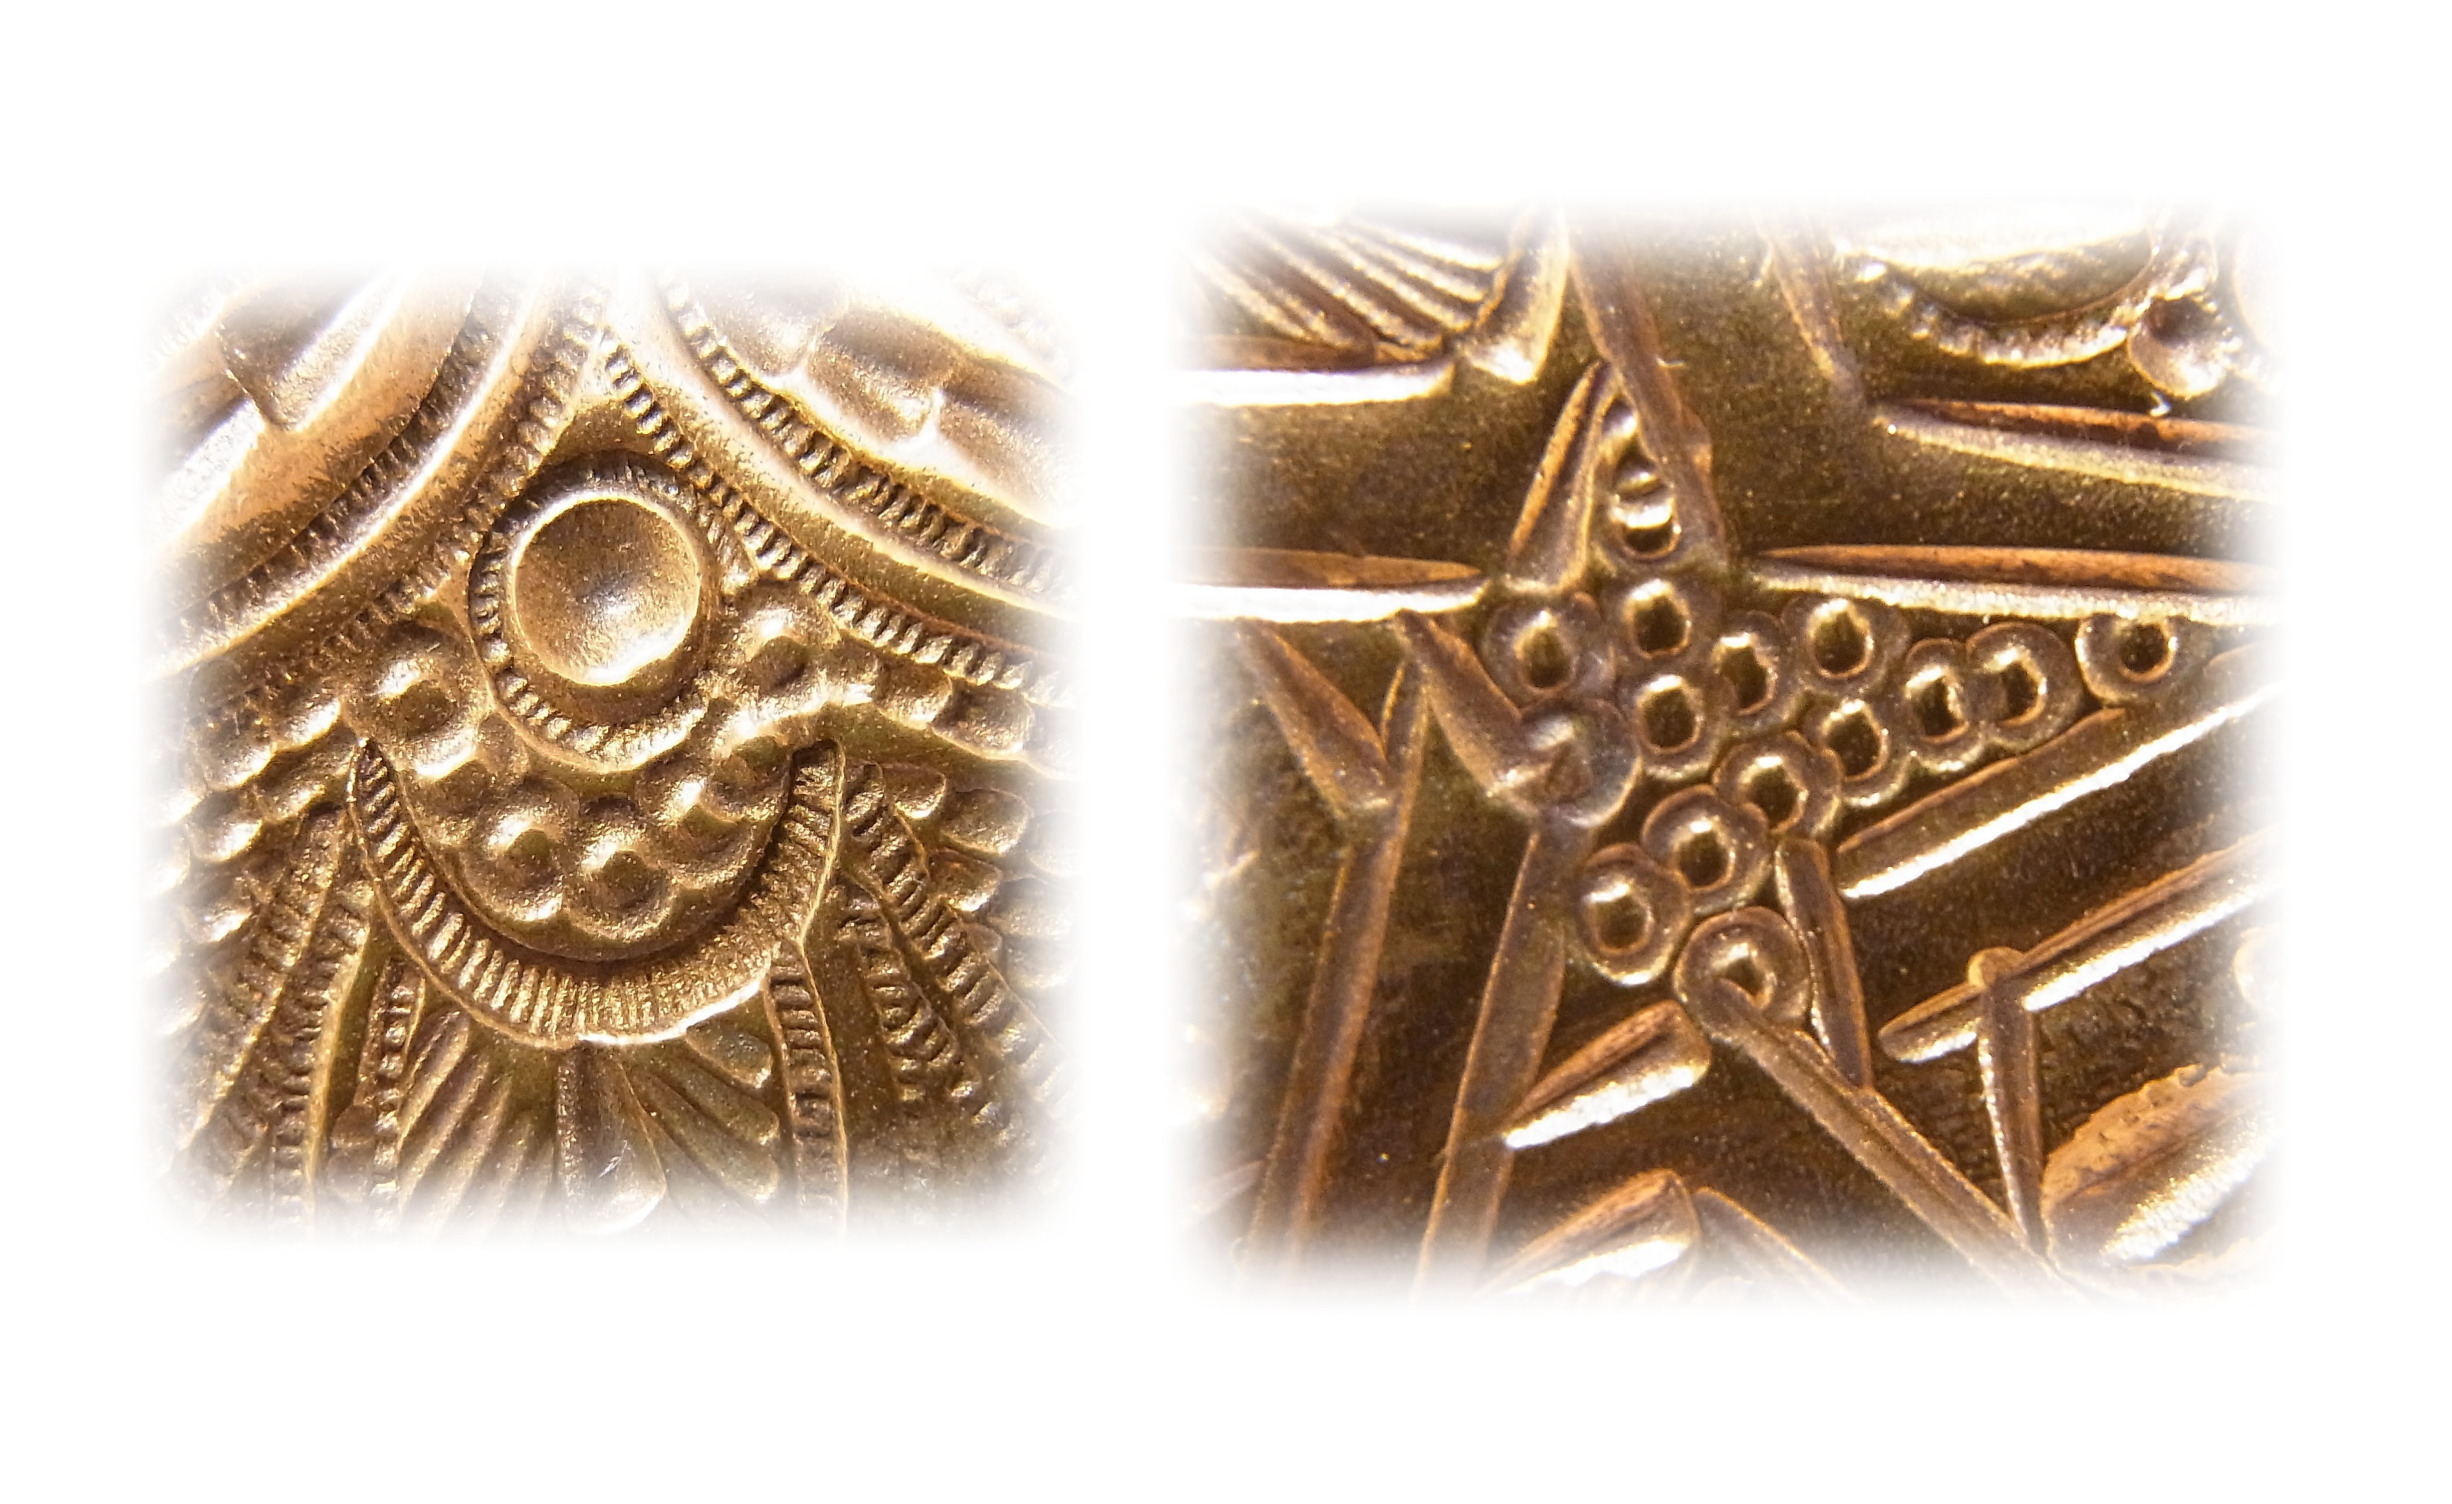 NANAKO stamps found in the brass plate of Fes